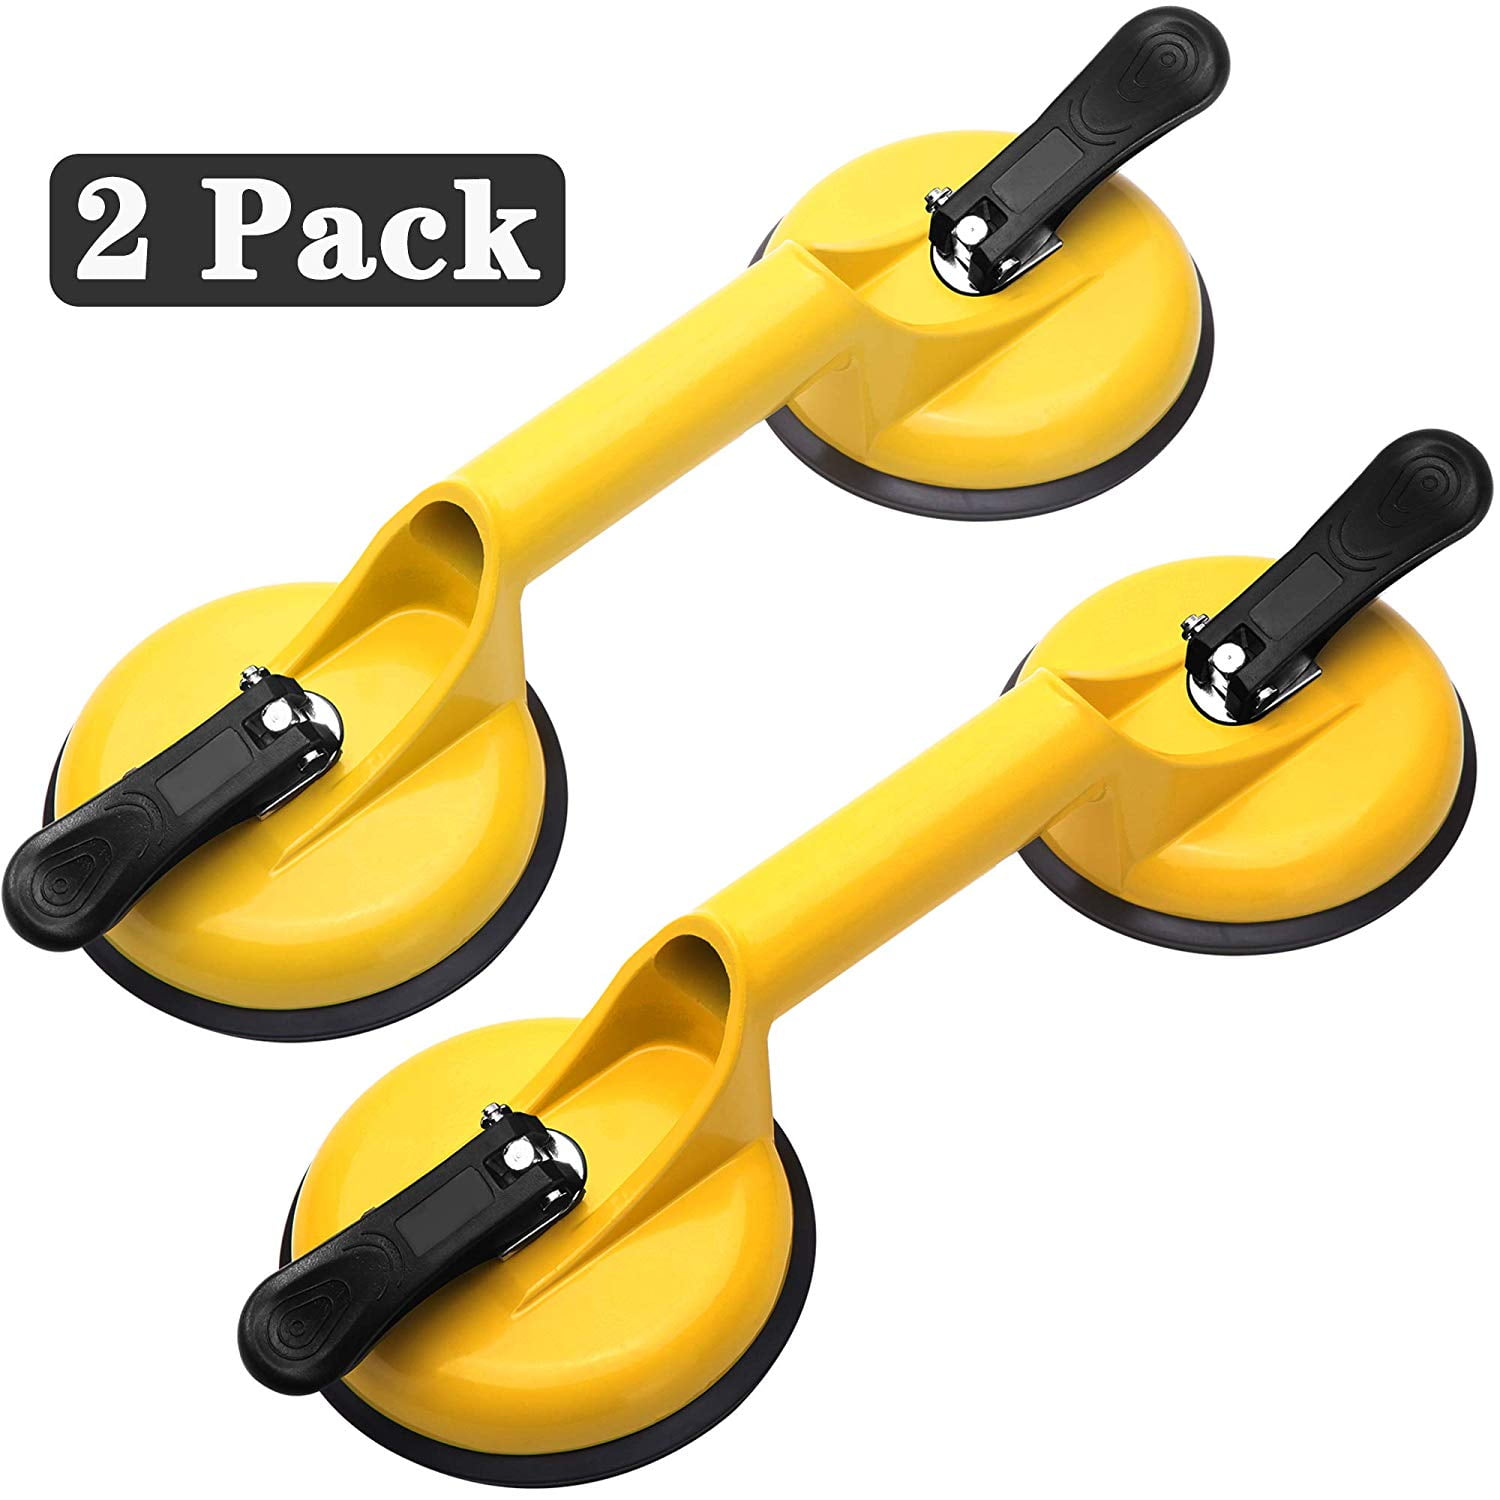 Queta 2 Pack Glass Suction Cups Heavy Duty Aluminum Vacuum Plate Double Handle Glass Holder to Lift Large Glass/Floor Gap Fixer/Tile Suction Cup Lifter/Moving Glass/Pad for Lifting/Dent Puller 